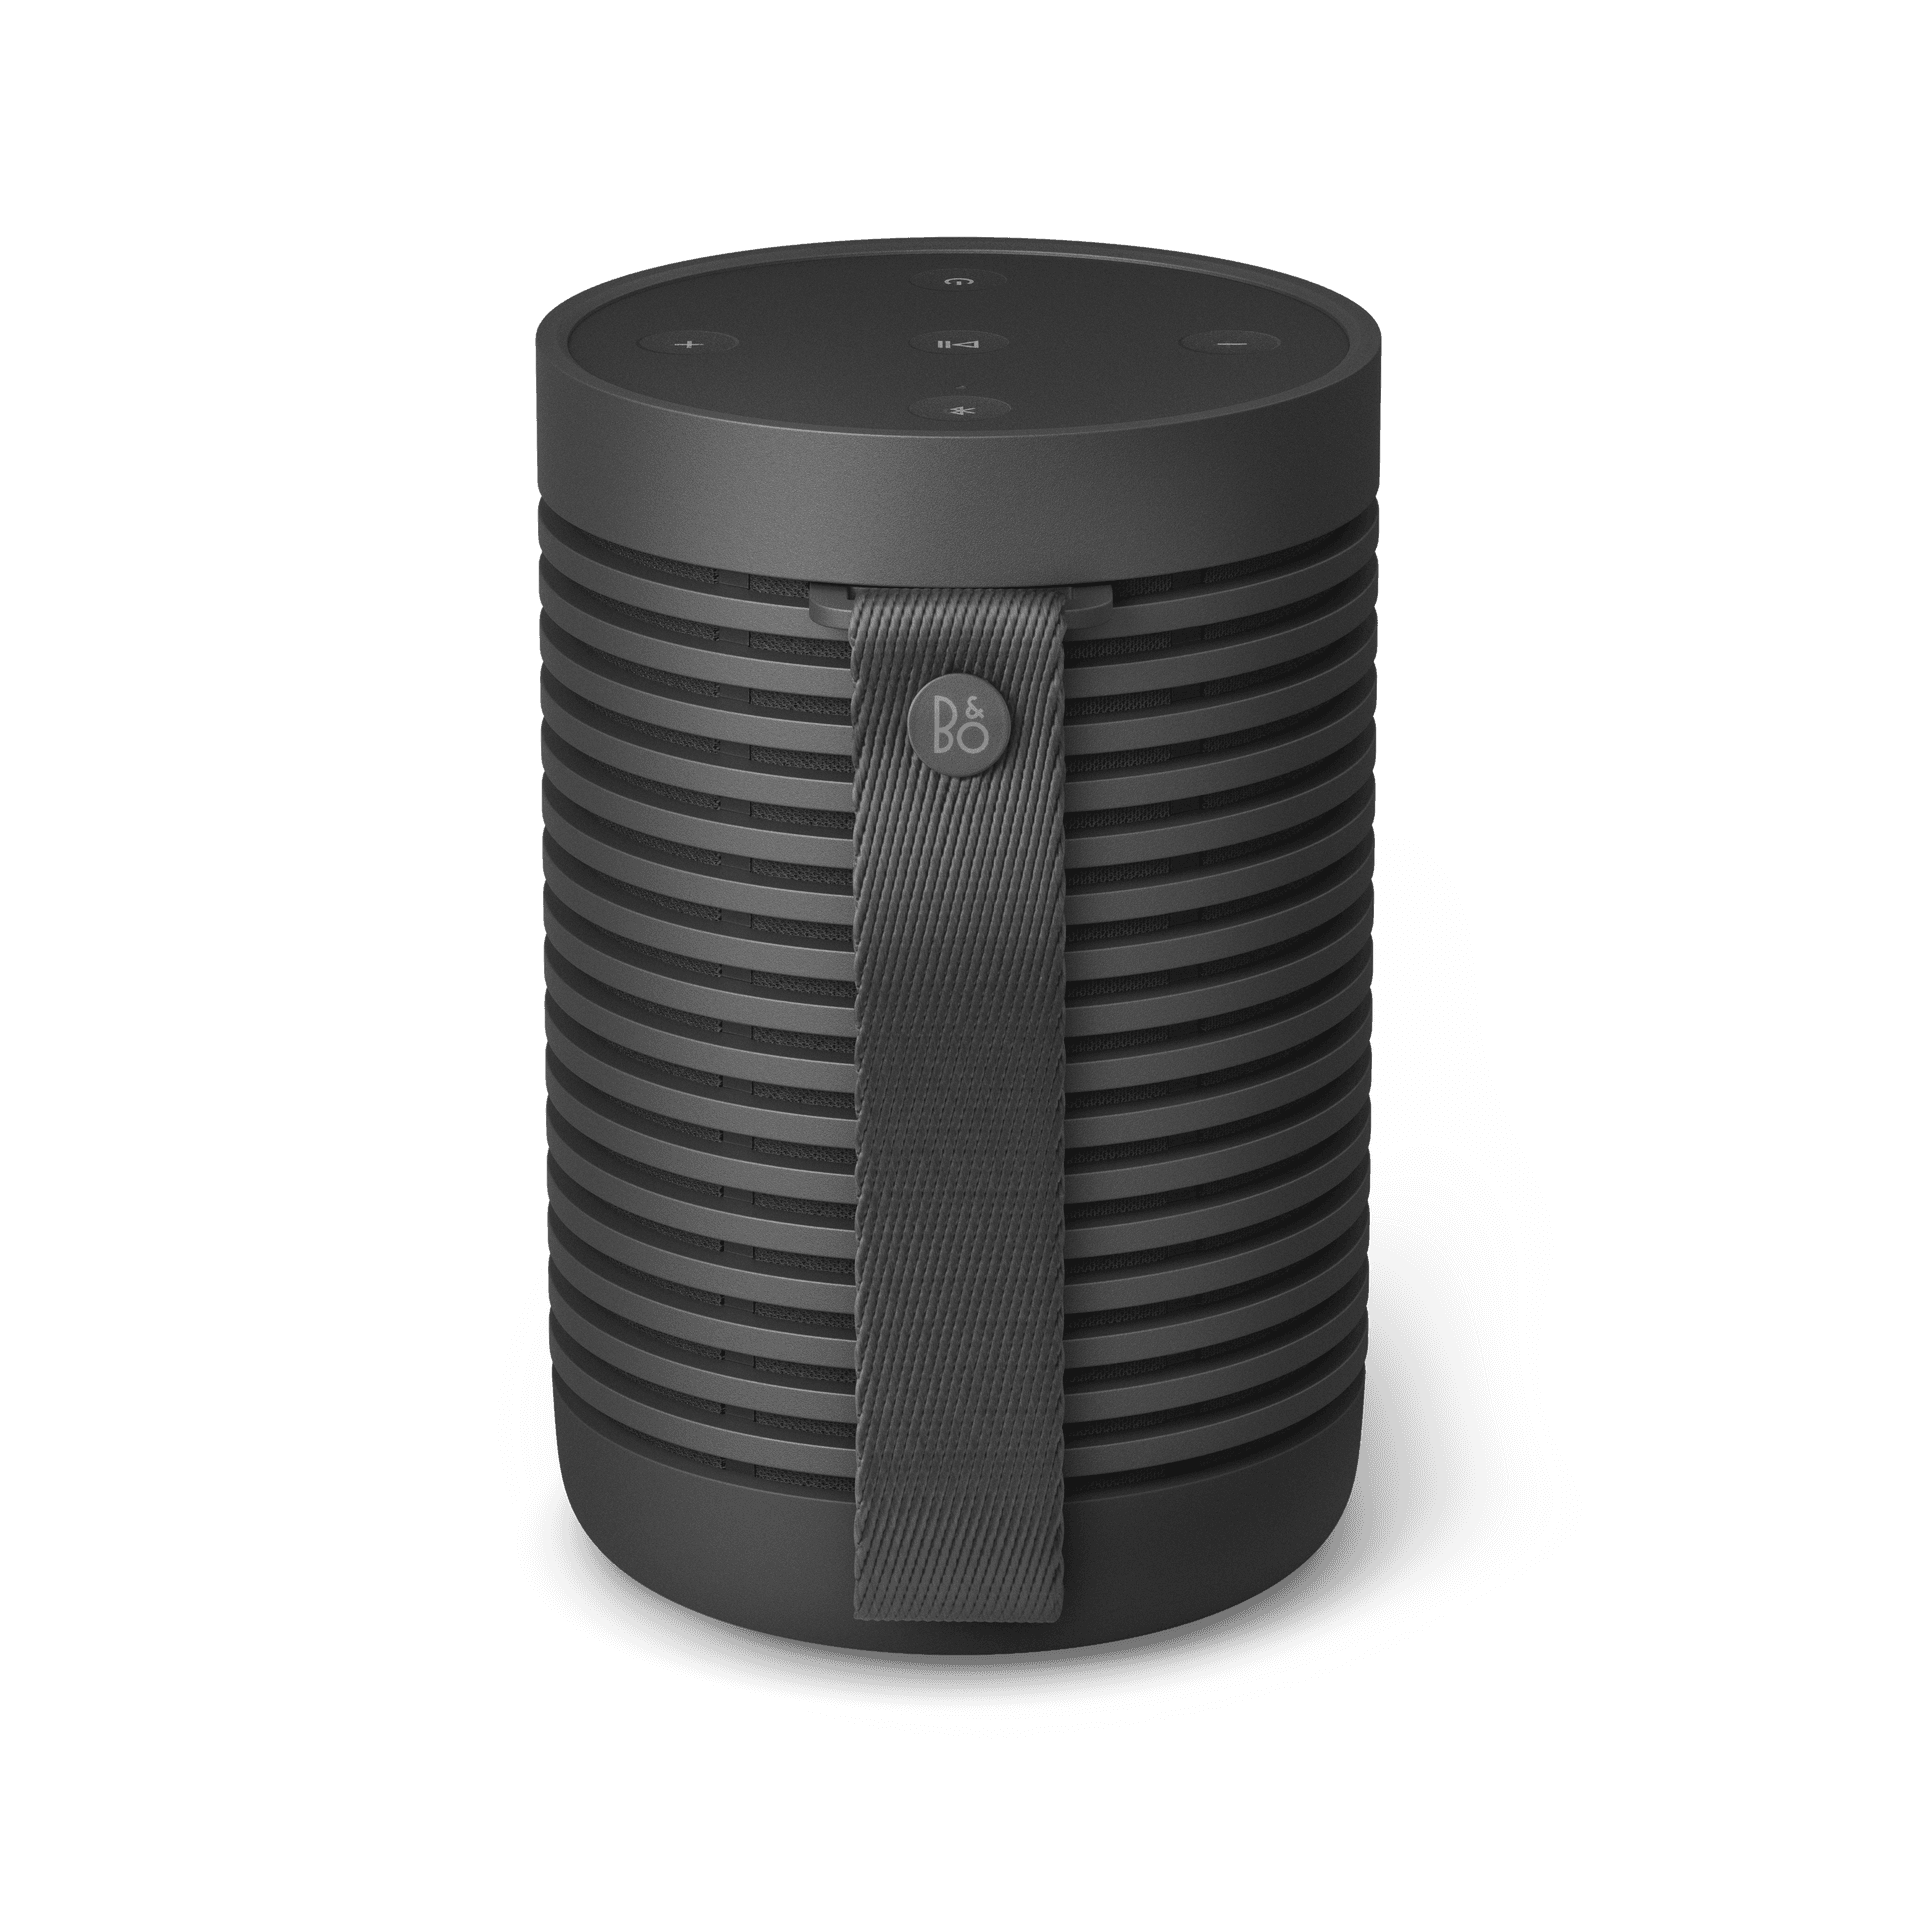 B&O Beosound Explore Portable Speaker - The Luxury Promotional Gifts Company Limited